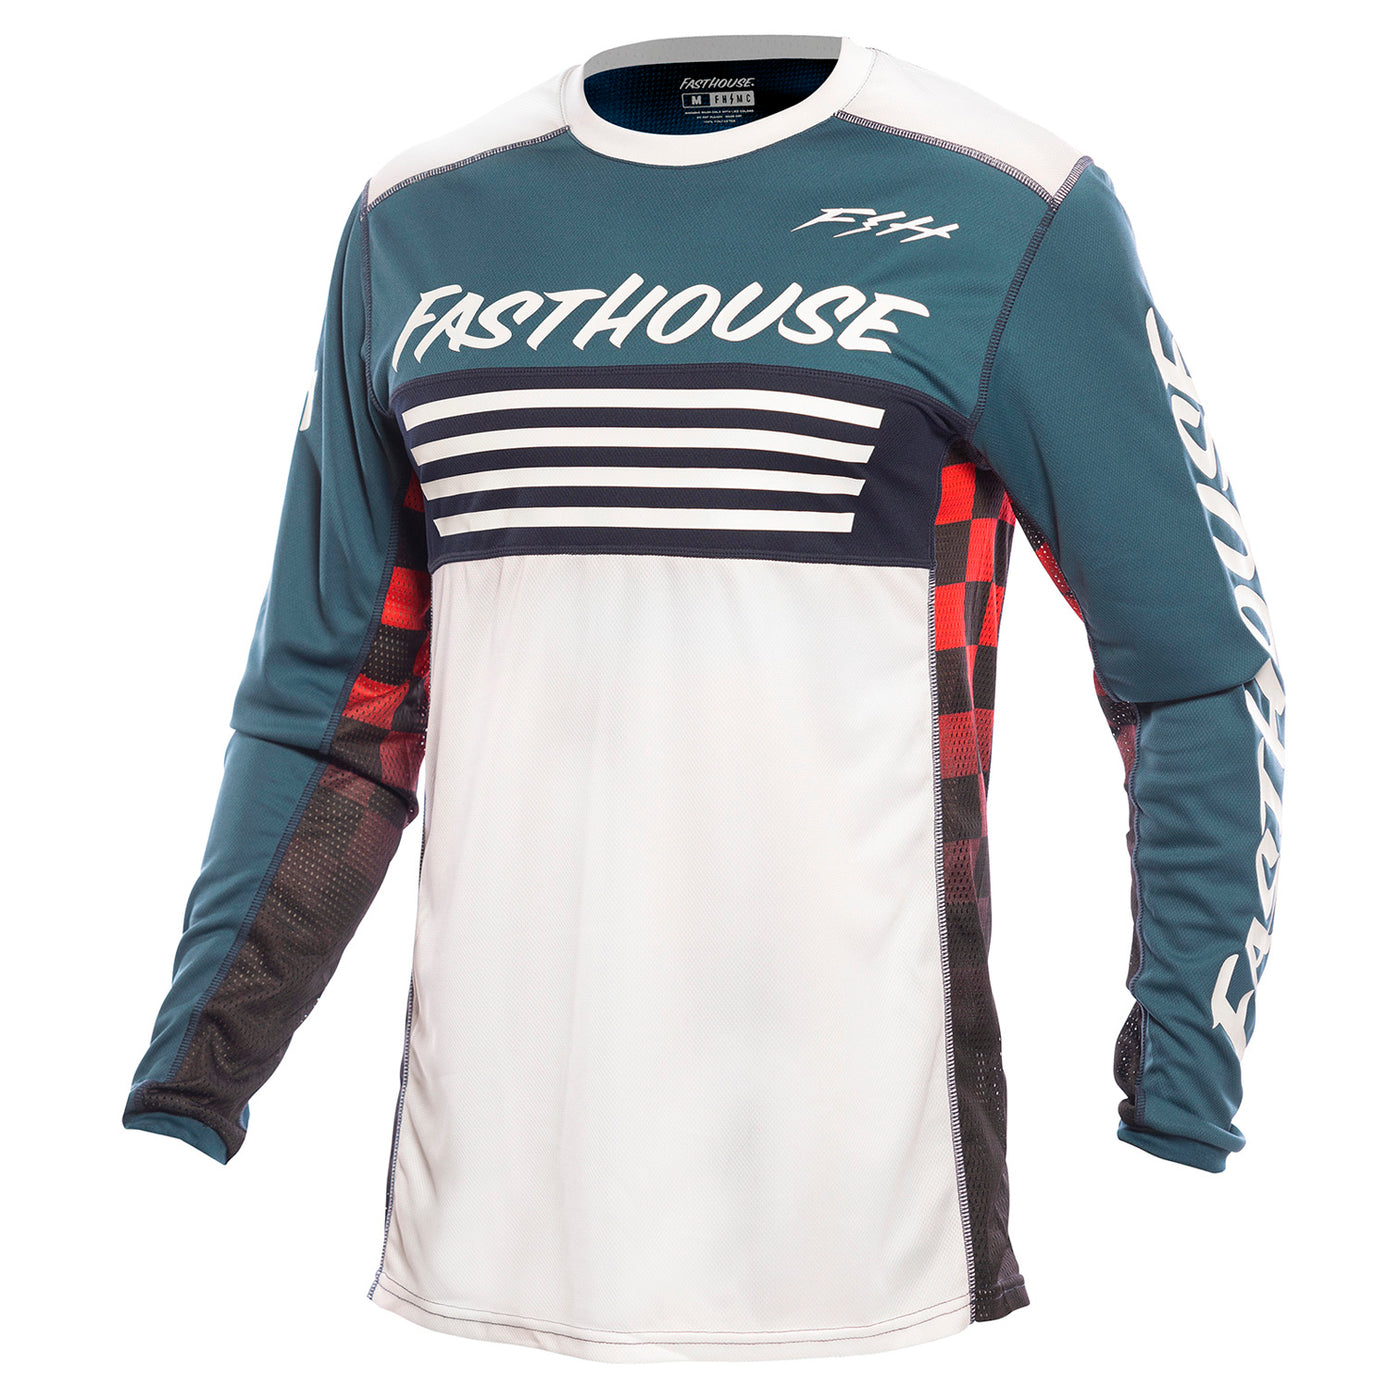 Fasthouse Grindhouse Omega Jersey